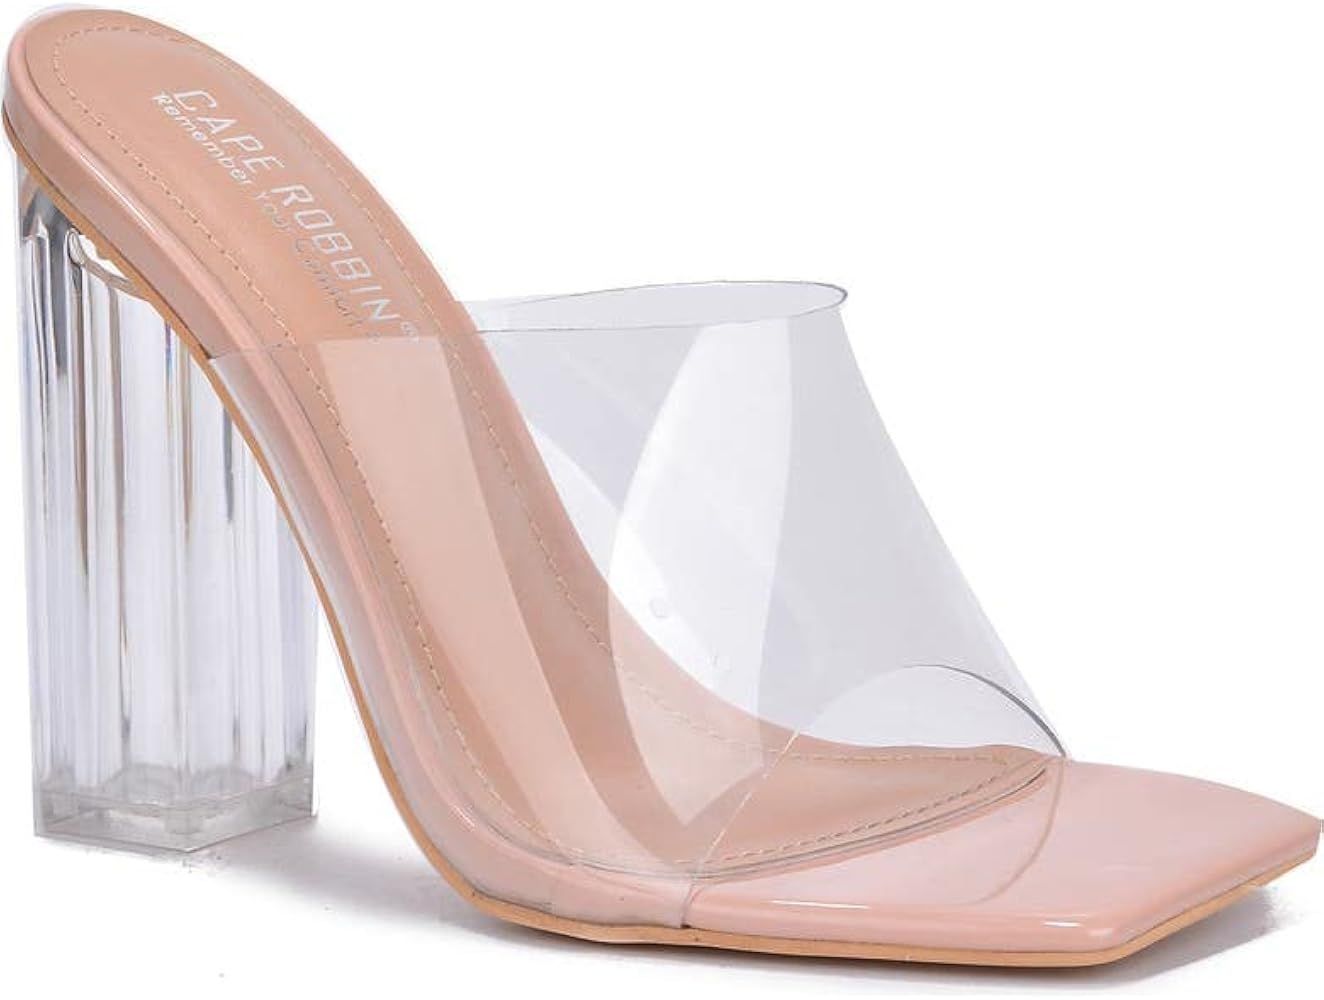 Cape Robbin Edna Clear Chunky Block High Heels for Women, Transparent Open Toe Mules Shoes Heels for | Amazon (US)